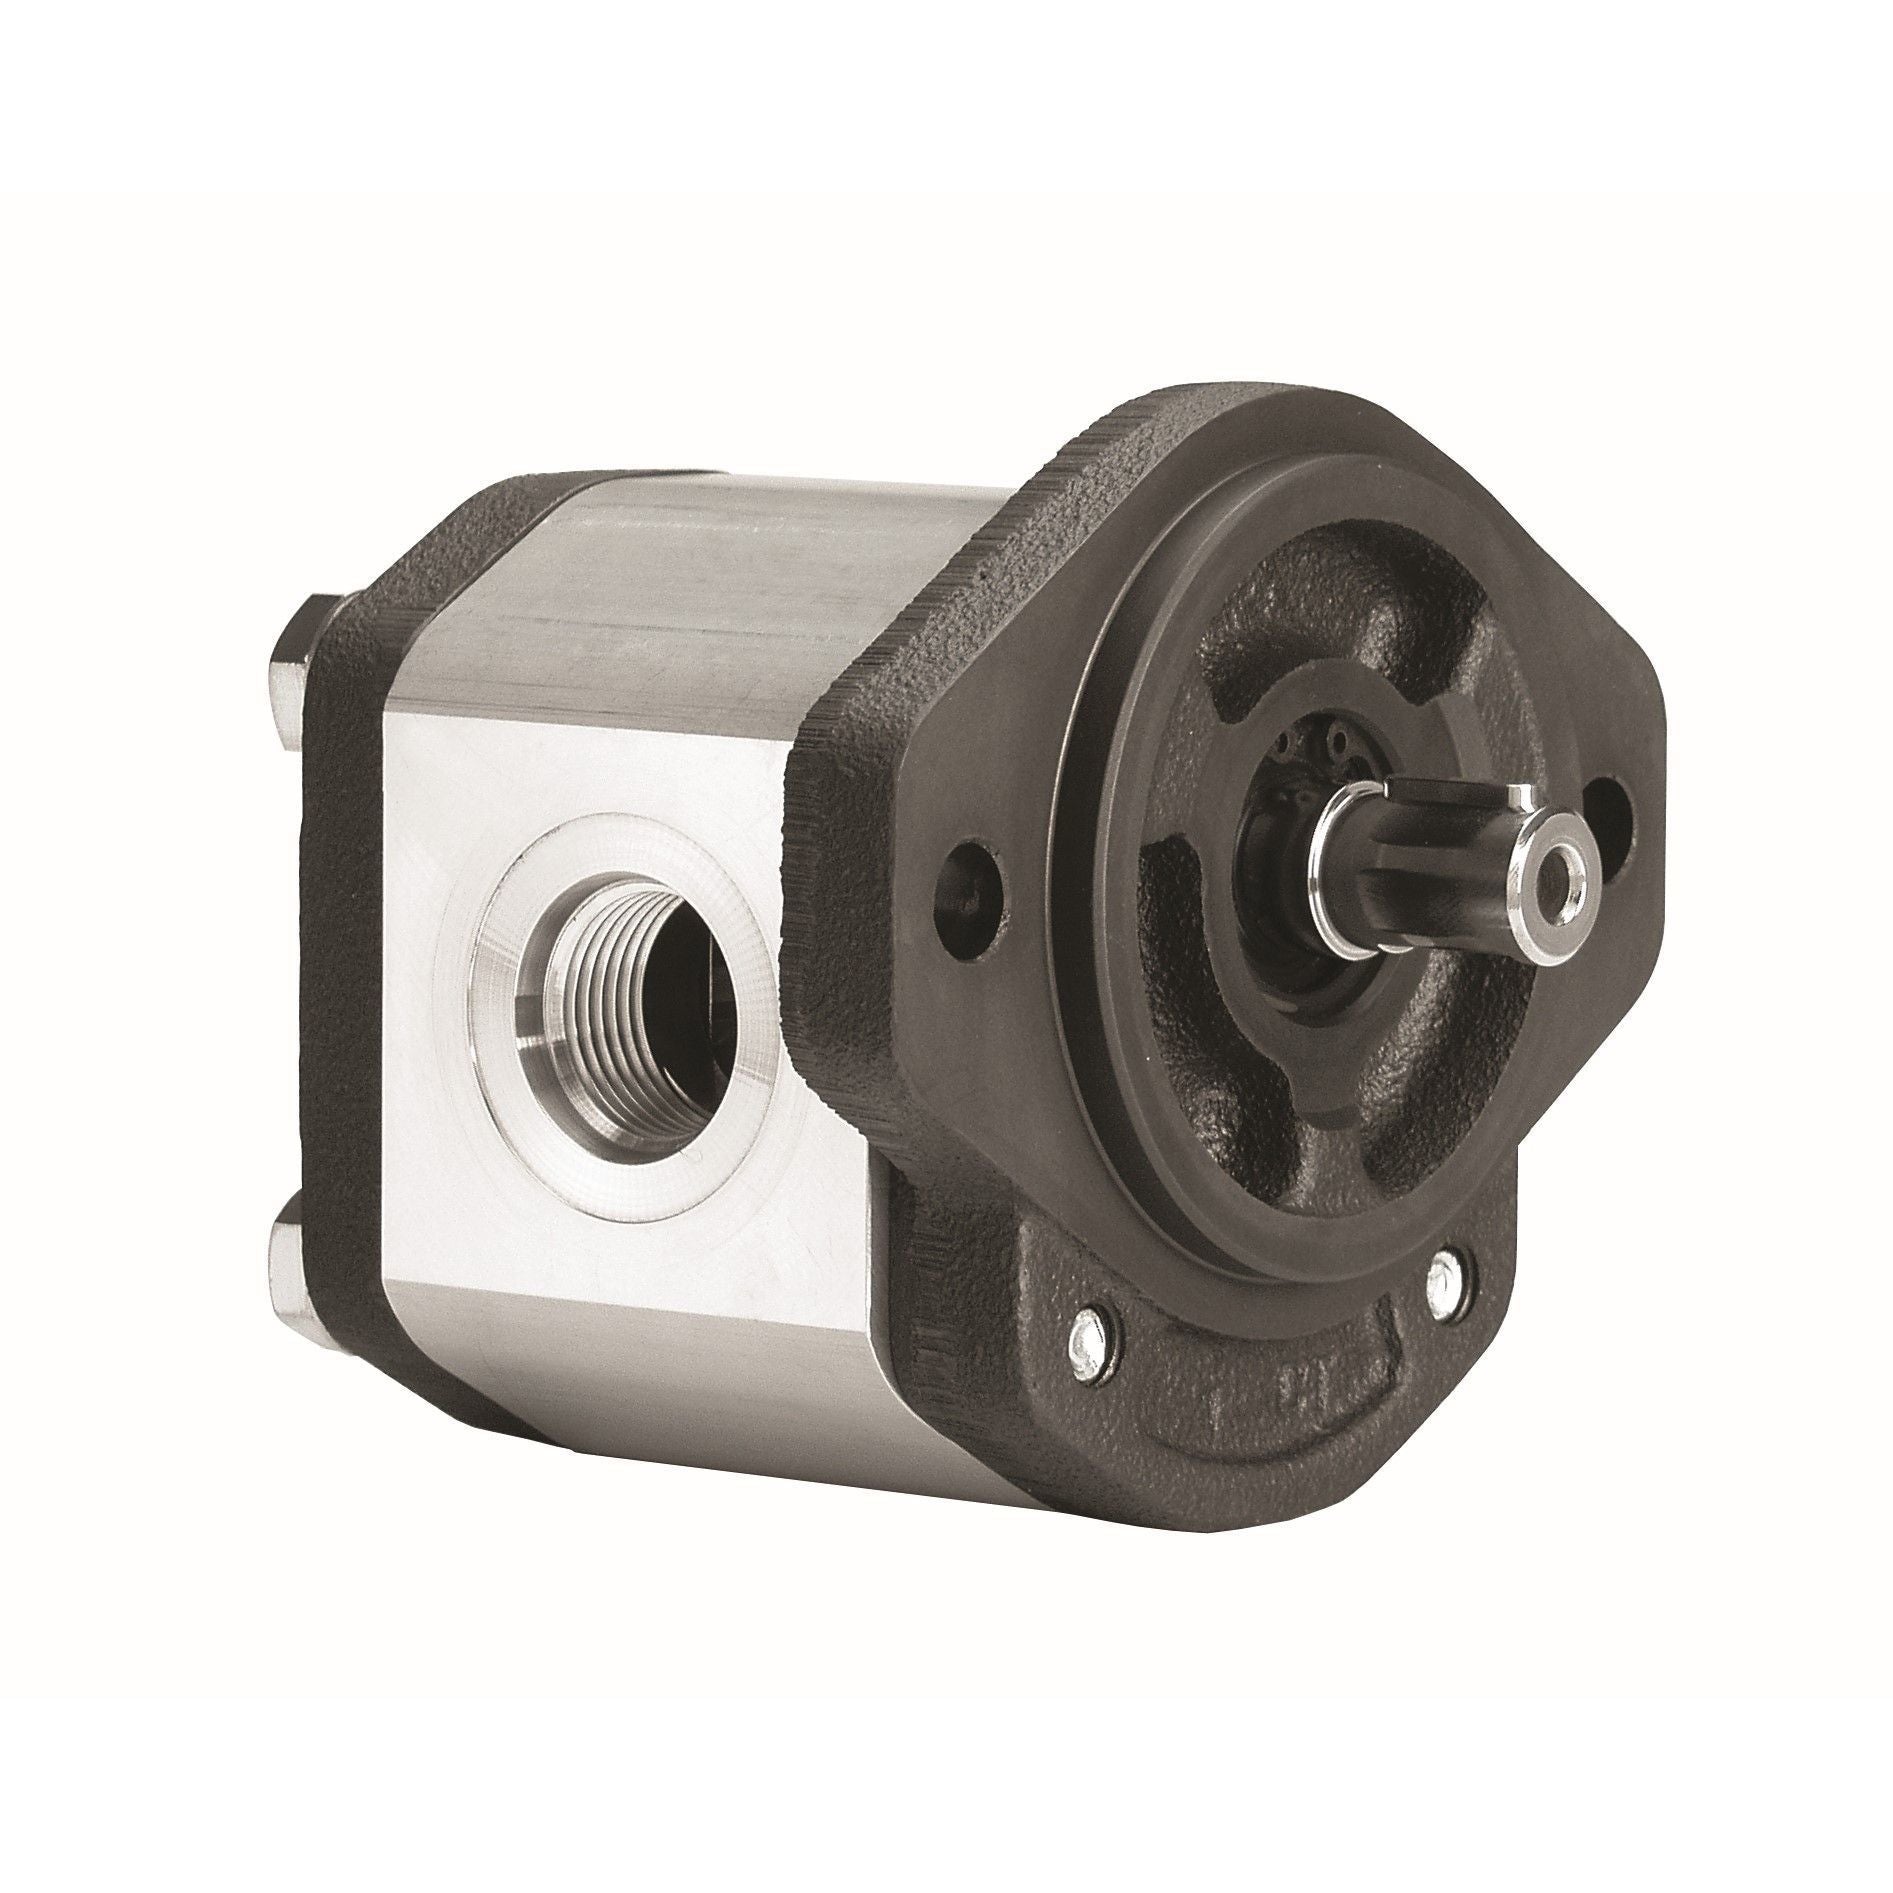 GHP2A-D-6 : Marzocchi Gear Pump, CW, 4.5cc (0.2745in3), 2.14 GPM, 4060psi, 4000 RPM, #12 SAE (3/4") In, #10 SAE (5/8") Out, Keyed Shaft 5/8" Bore x 5/32" Key, SAE A 2-Bolt Mount